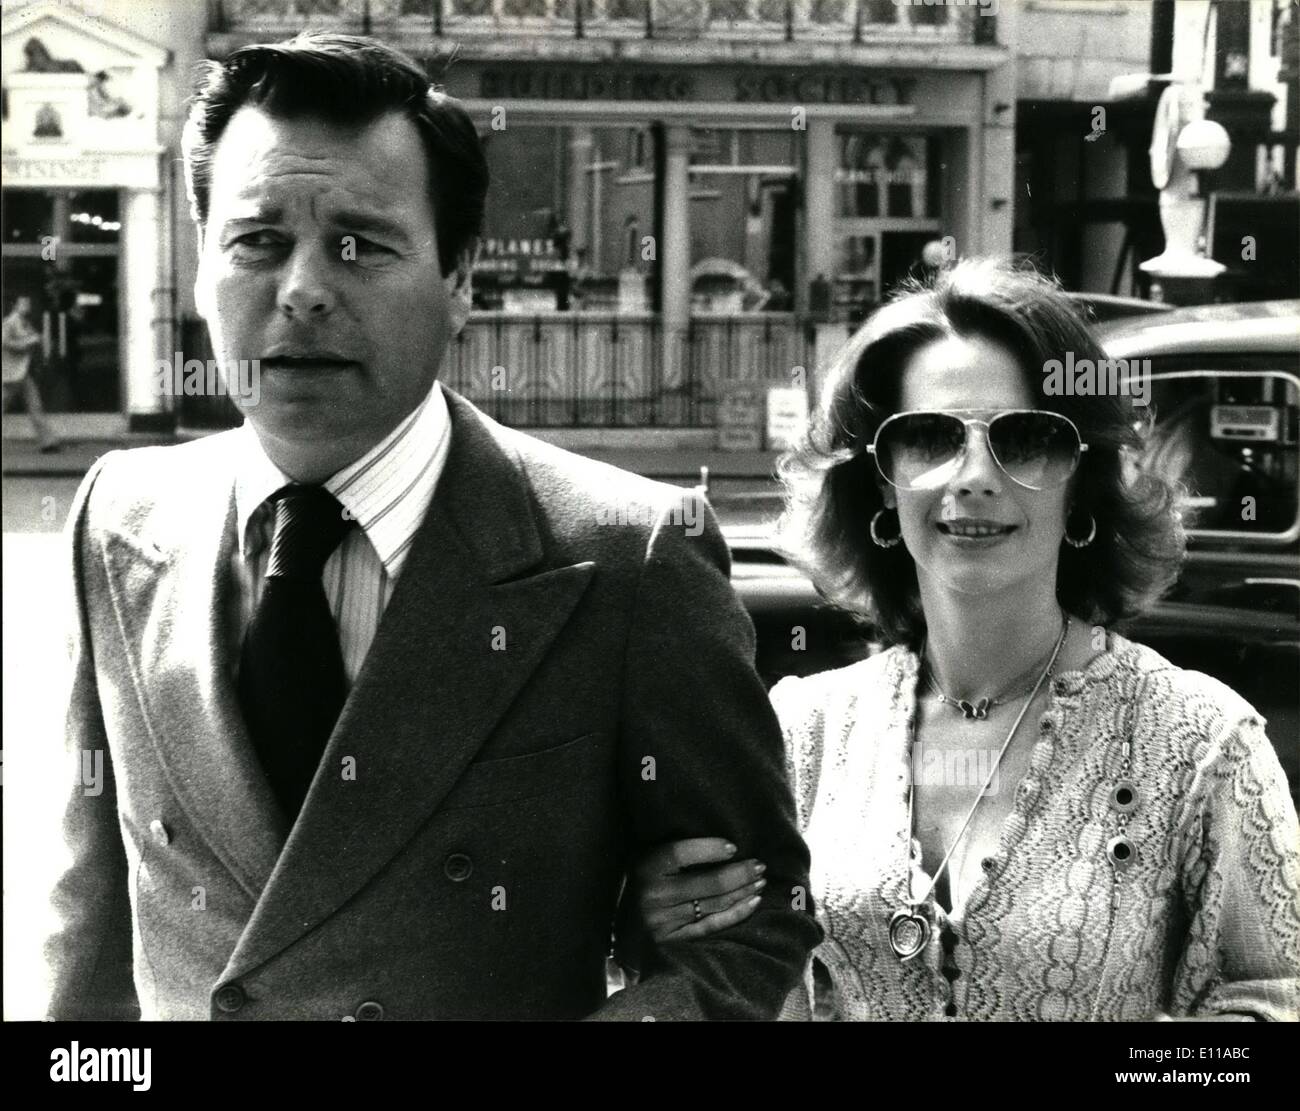 Jun. 06, 1976 - Actor Robert Wagner and his actress wife Natalie Wood receive undisclosed damages in libel case: Actor Robert Wagner and his second time around actress wife, Natalie Wood were awarded undisclosed damages from the weekly newspaper Reveille in a libel case at the High Court today. The newspaper gave the impression their second marriage had broken down and they were getting divorced again. The newspaper carried an article last August headed ''Divorce No2 for Wagner. It was totally false. Robert, 46, and actress Natalie married in 1957. They divorced in 1962 and remarried in 1972 Stock Photo